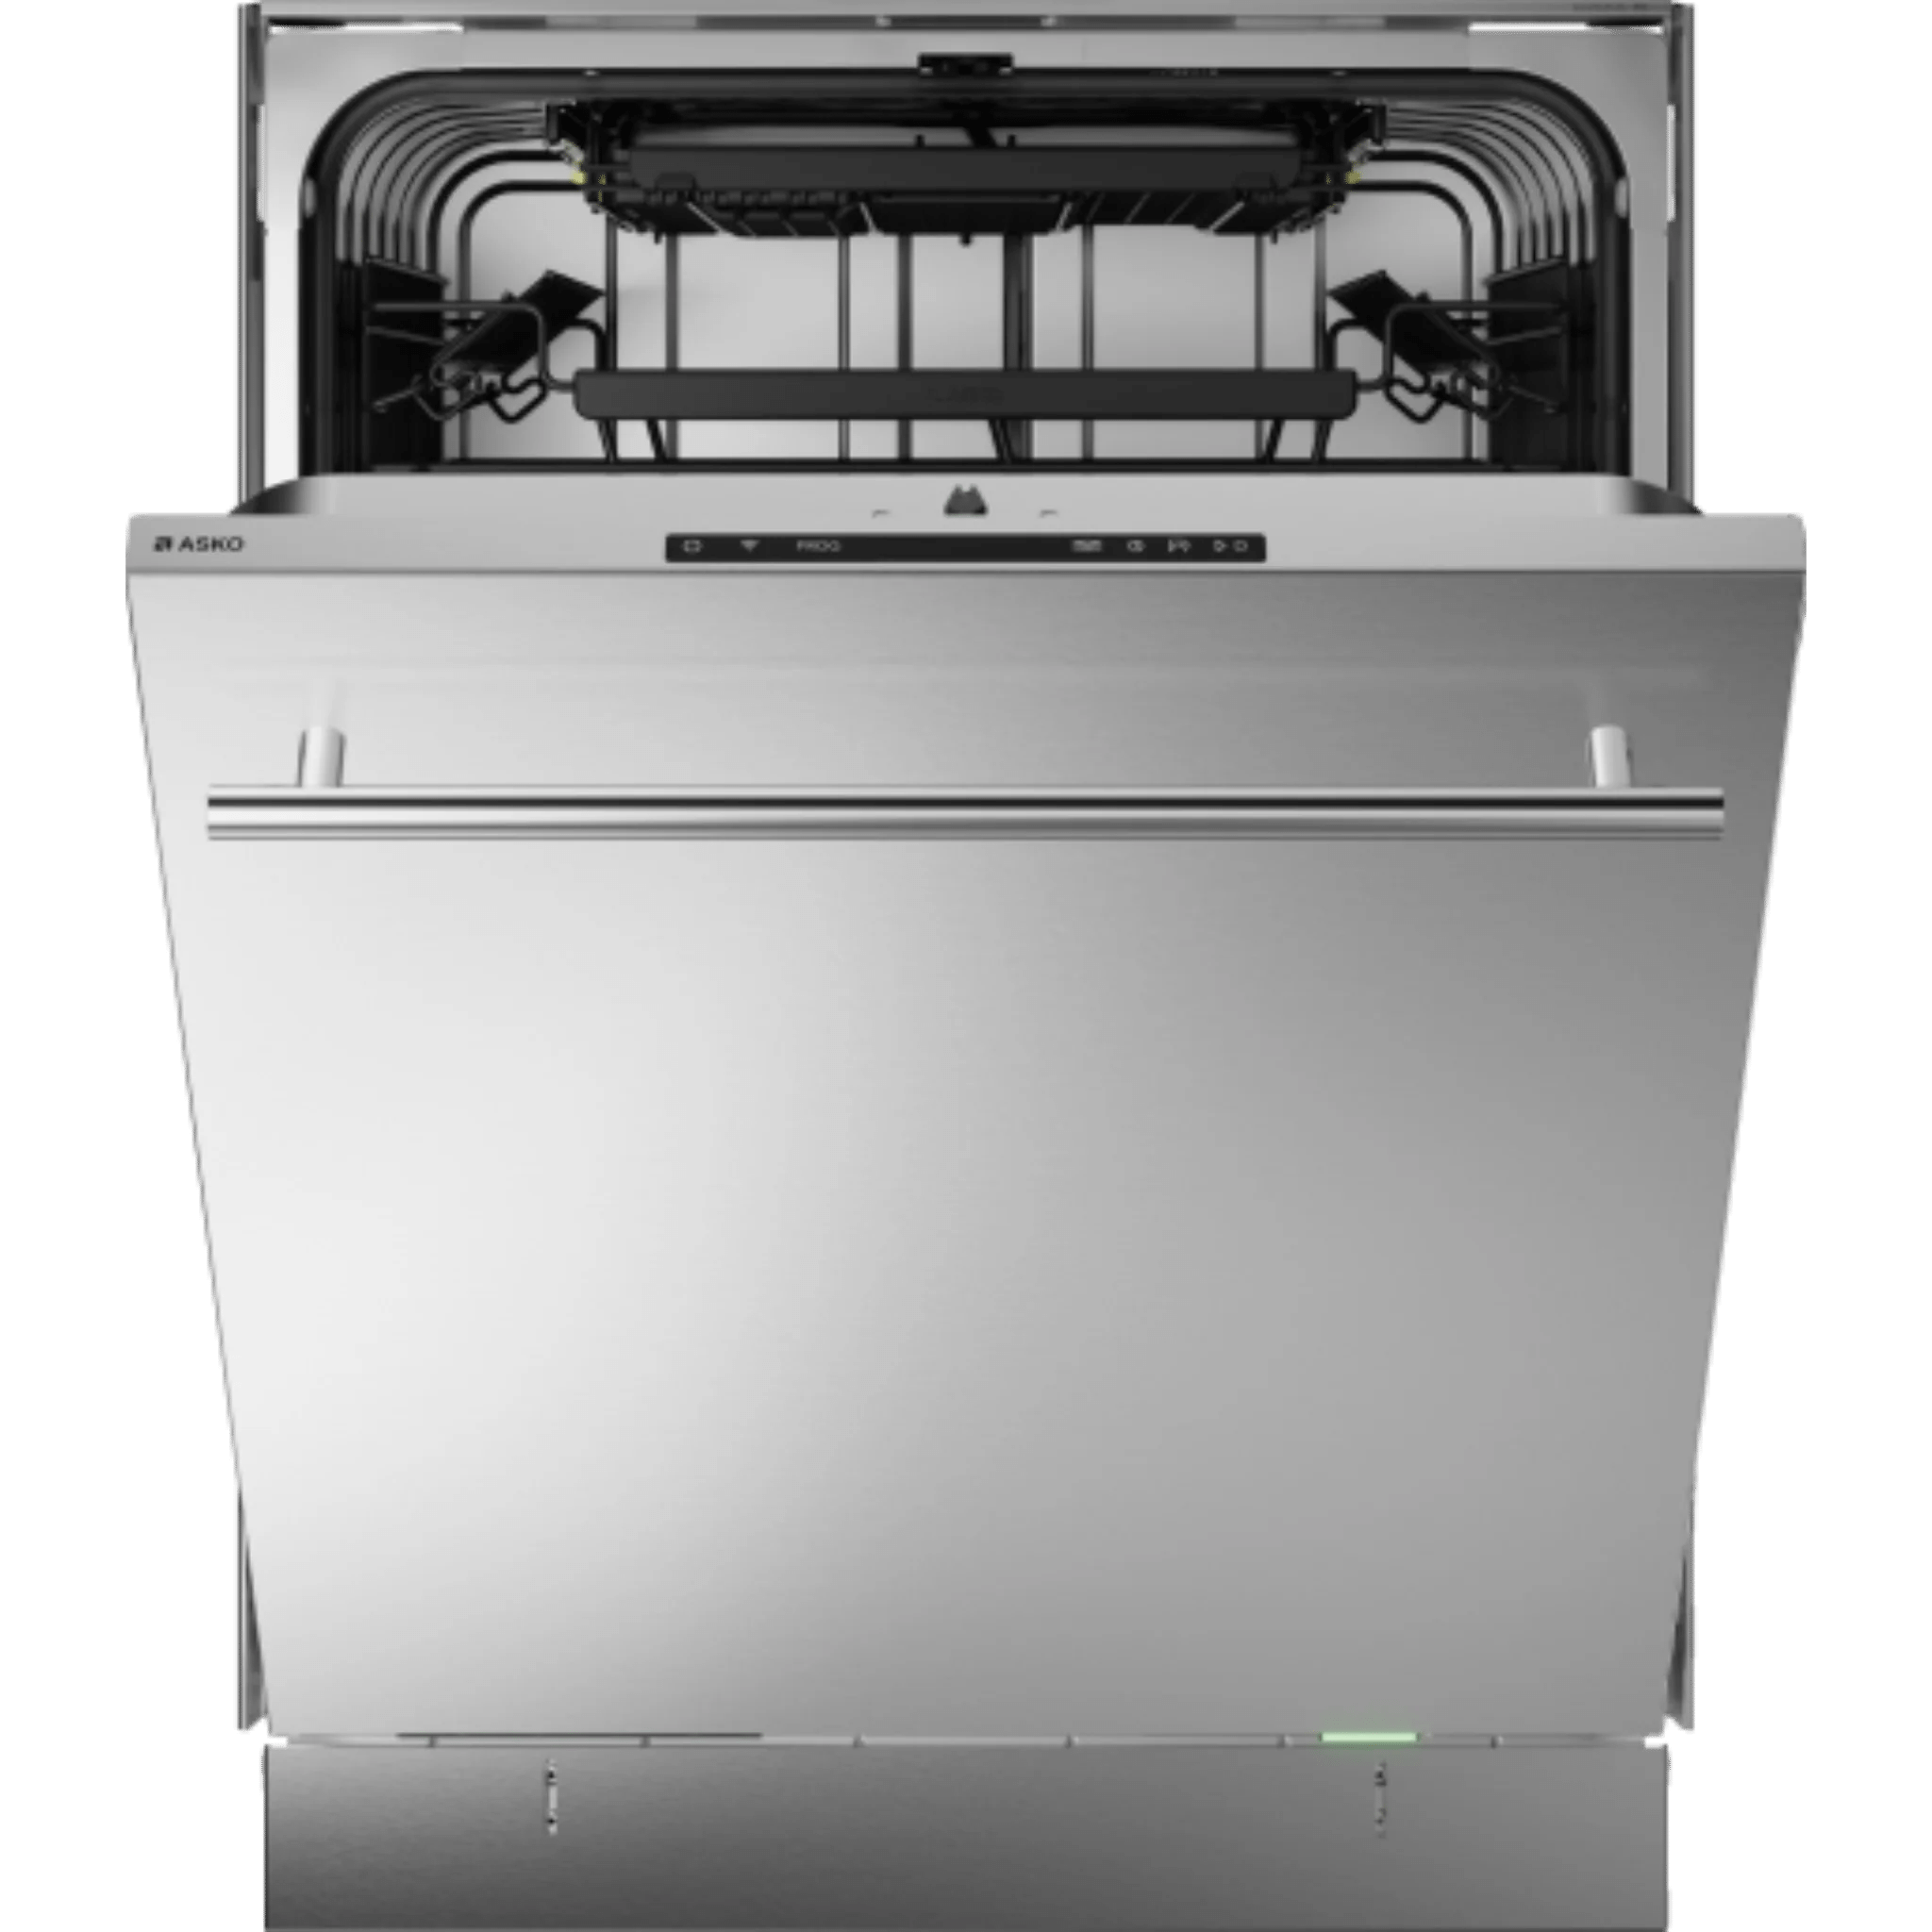 Asko Logic 24 Inch Wide 16 Place Setting Built-In Top Control Dishwasher with T-Bar Handle, Turbo Combi Drying™, and Auto Door Open Drying™ Dishwashers DBI564TS Luxury Appliances Direct